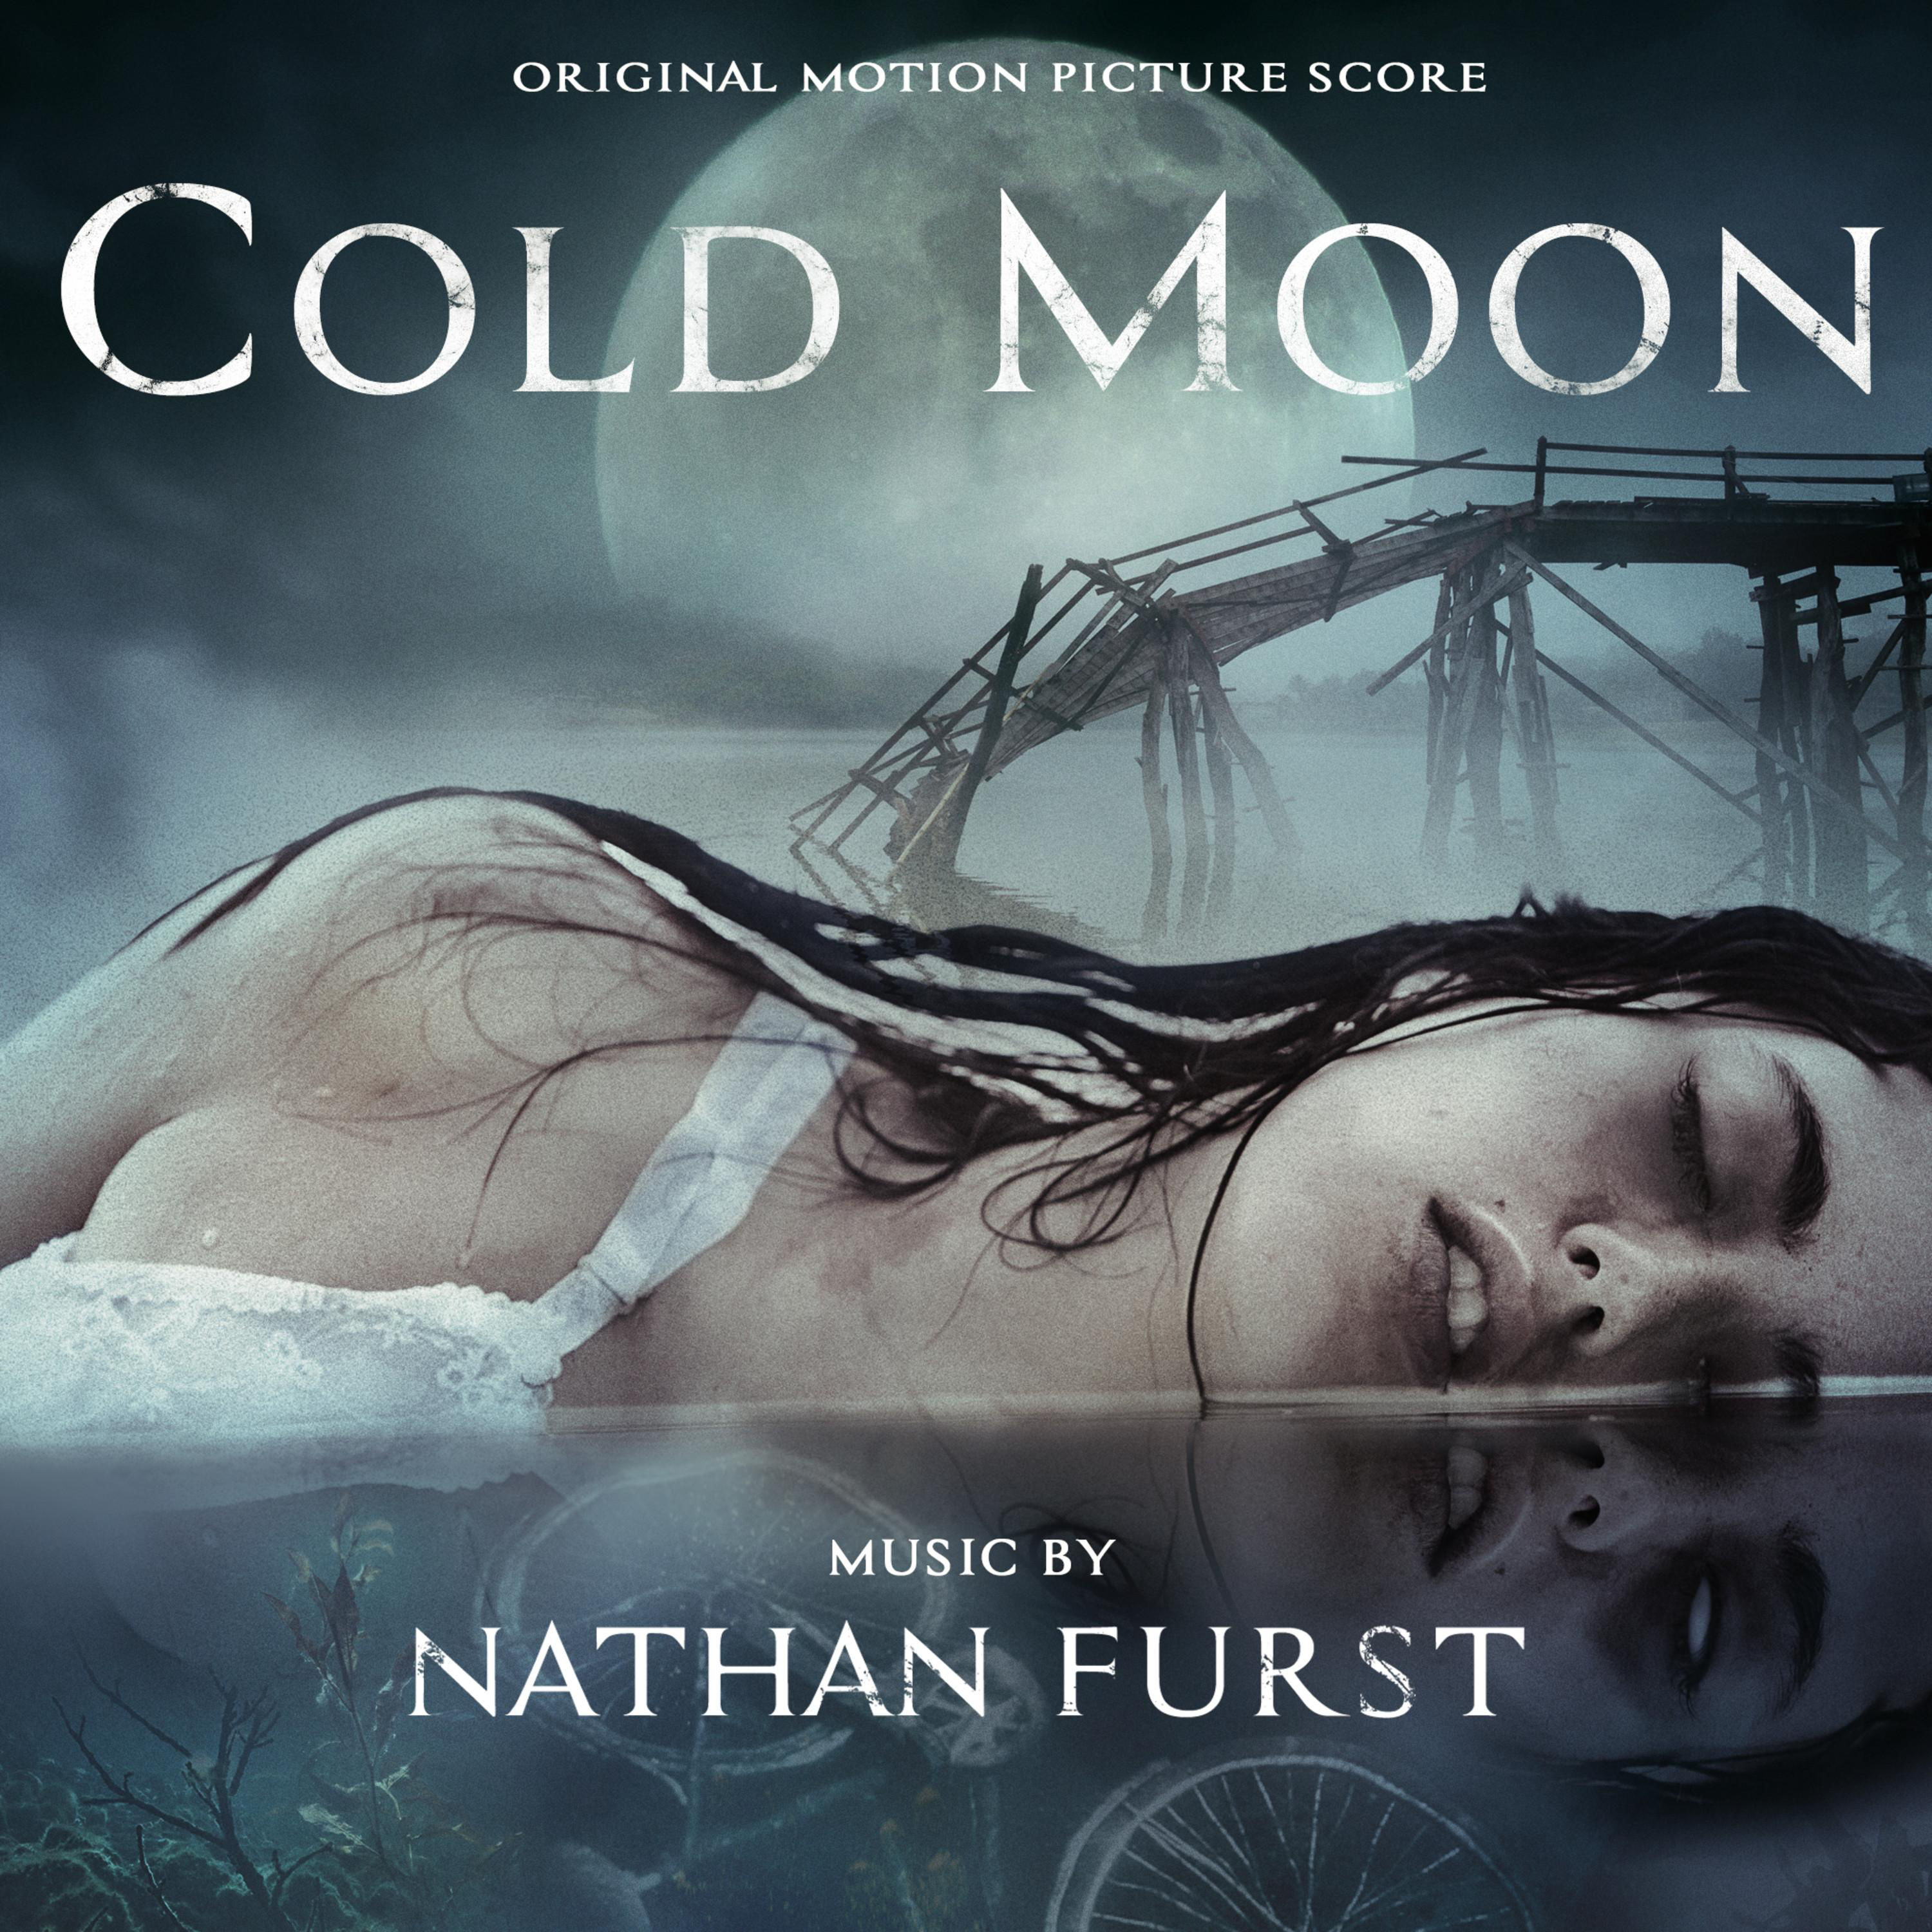 Cold moon 2016